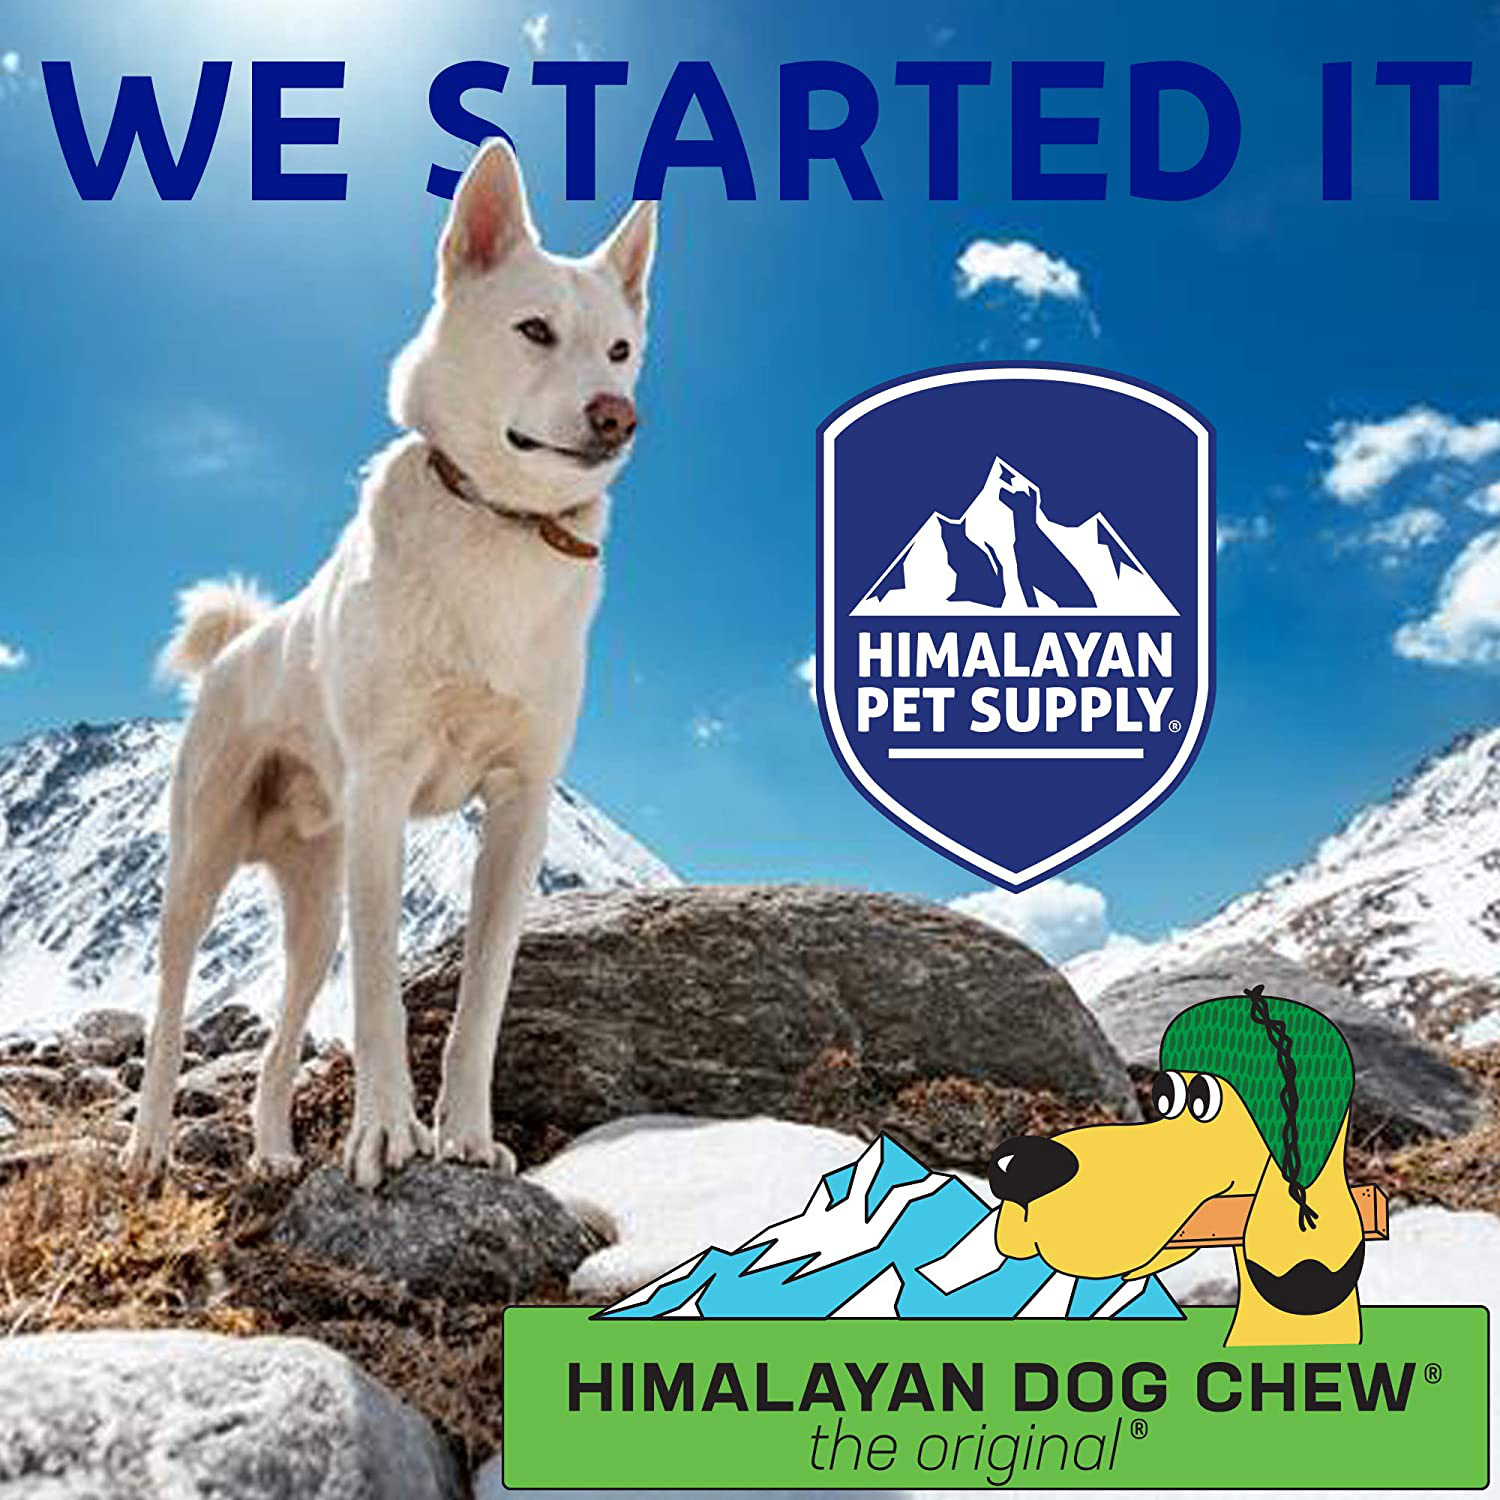 Himalayan Yak Cheese Dog Chews | the Original Himalayan Hard Cheese Dog Chew | 100% Natural, Healthy & Safe | No Lactose, Gluten or Grains | MIXED SIZES | for Dogs 65 Lbs & Smaller